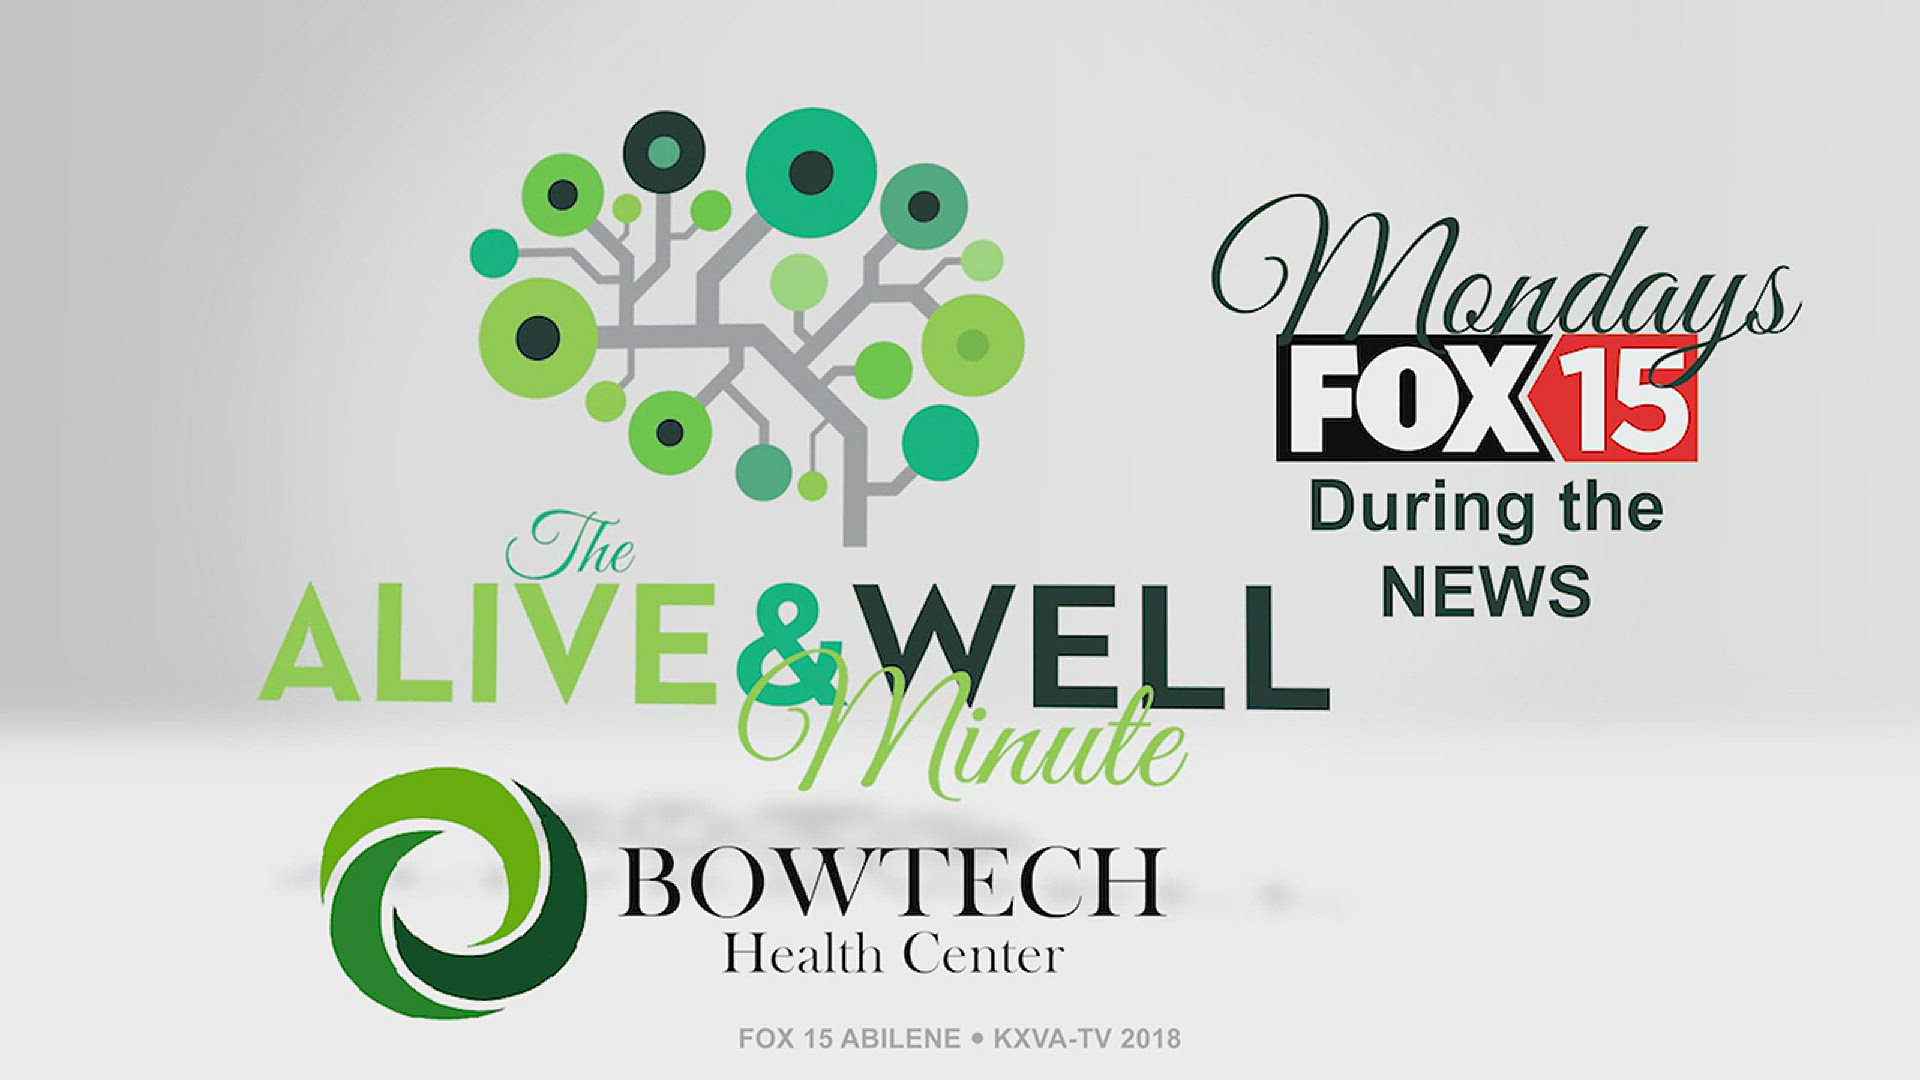 The Bowtech Health Center and KXVA FOX15 bring you Alive & Well every Monday during the KXVA FOX15 newscasts. For any questions you have regarding natural and holistic approaches to improved health, call the Bowtech Health Center at 325-676-9227.